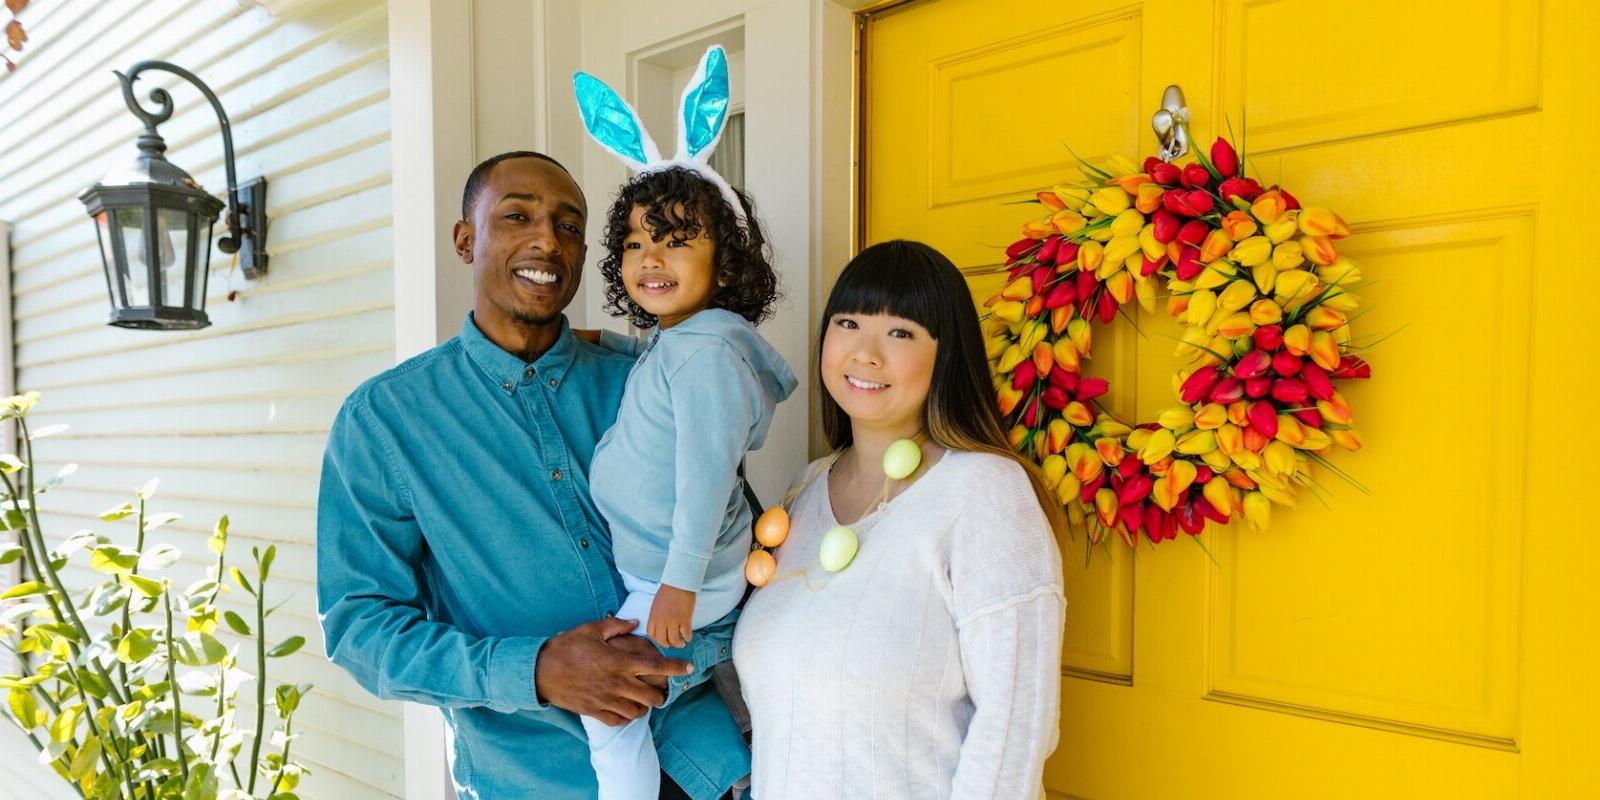 8 Easter Family Photoshoot Ideas to Try in 2023